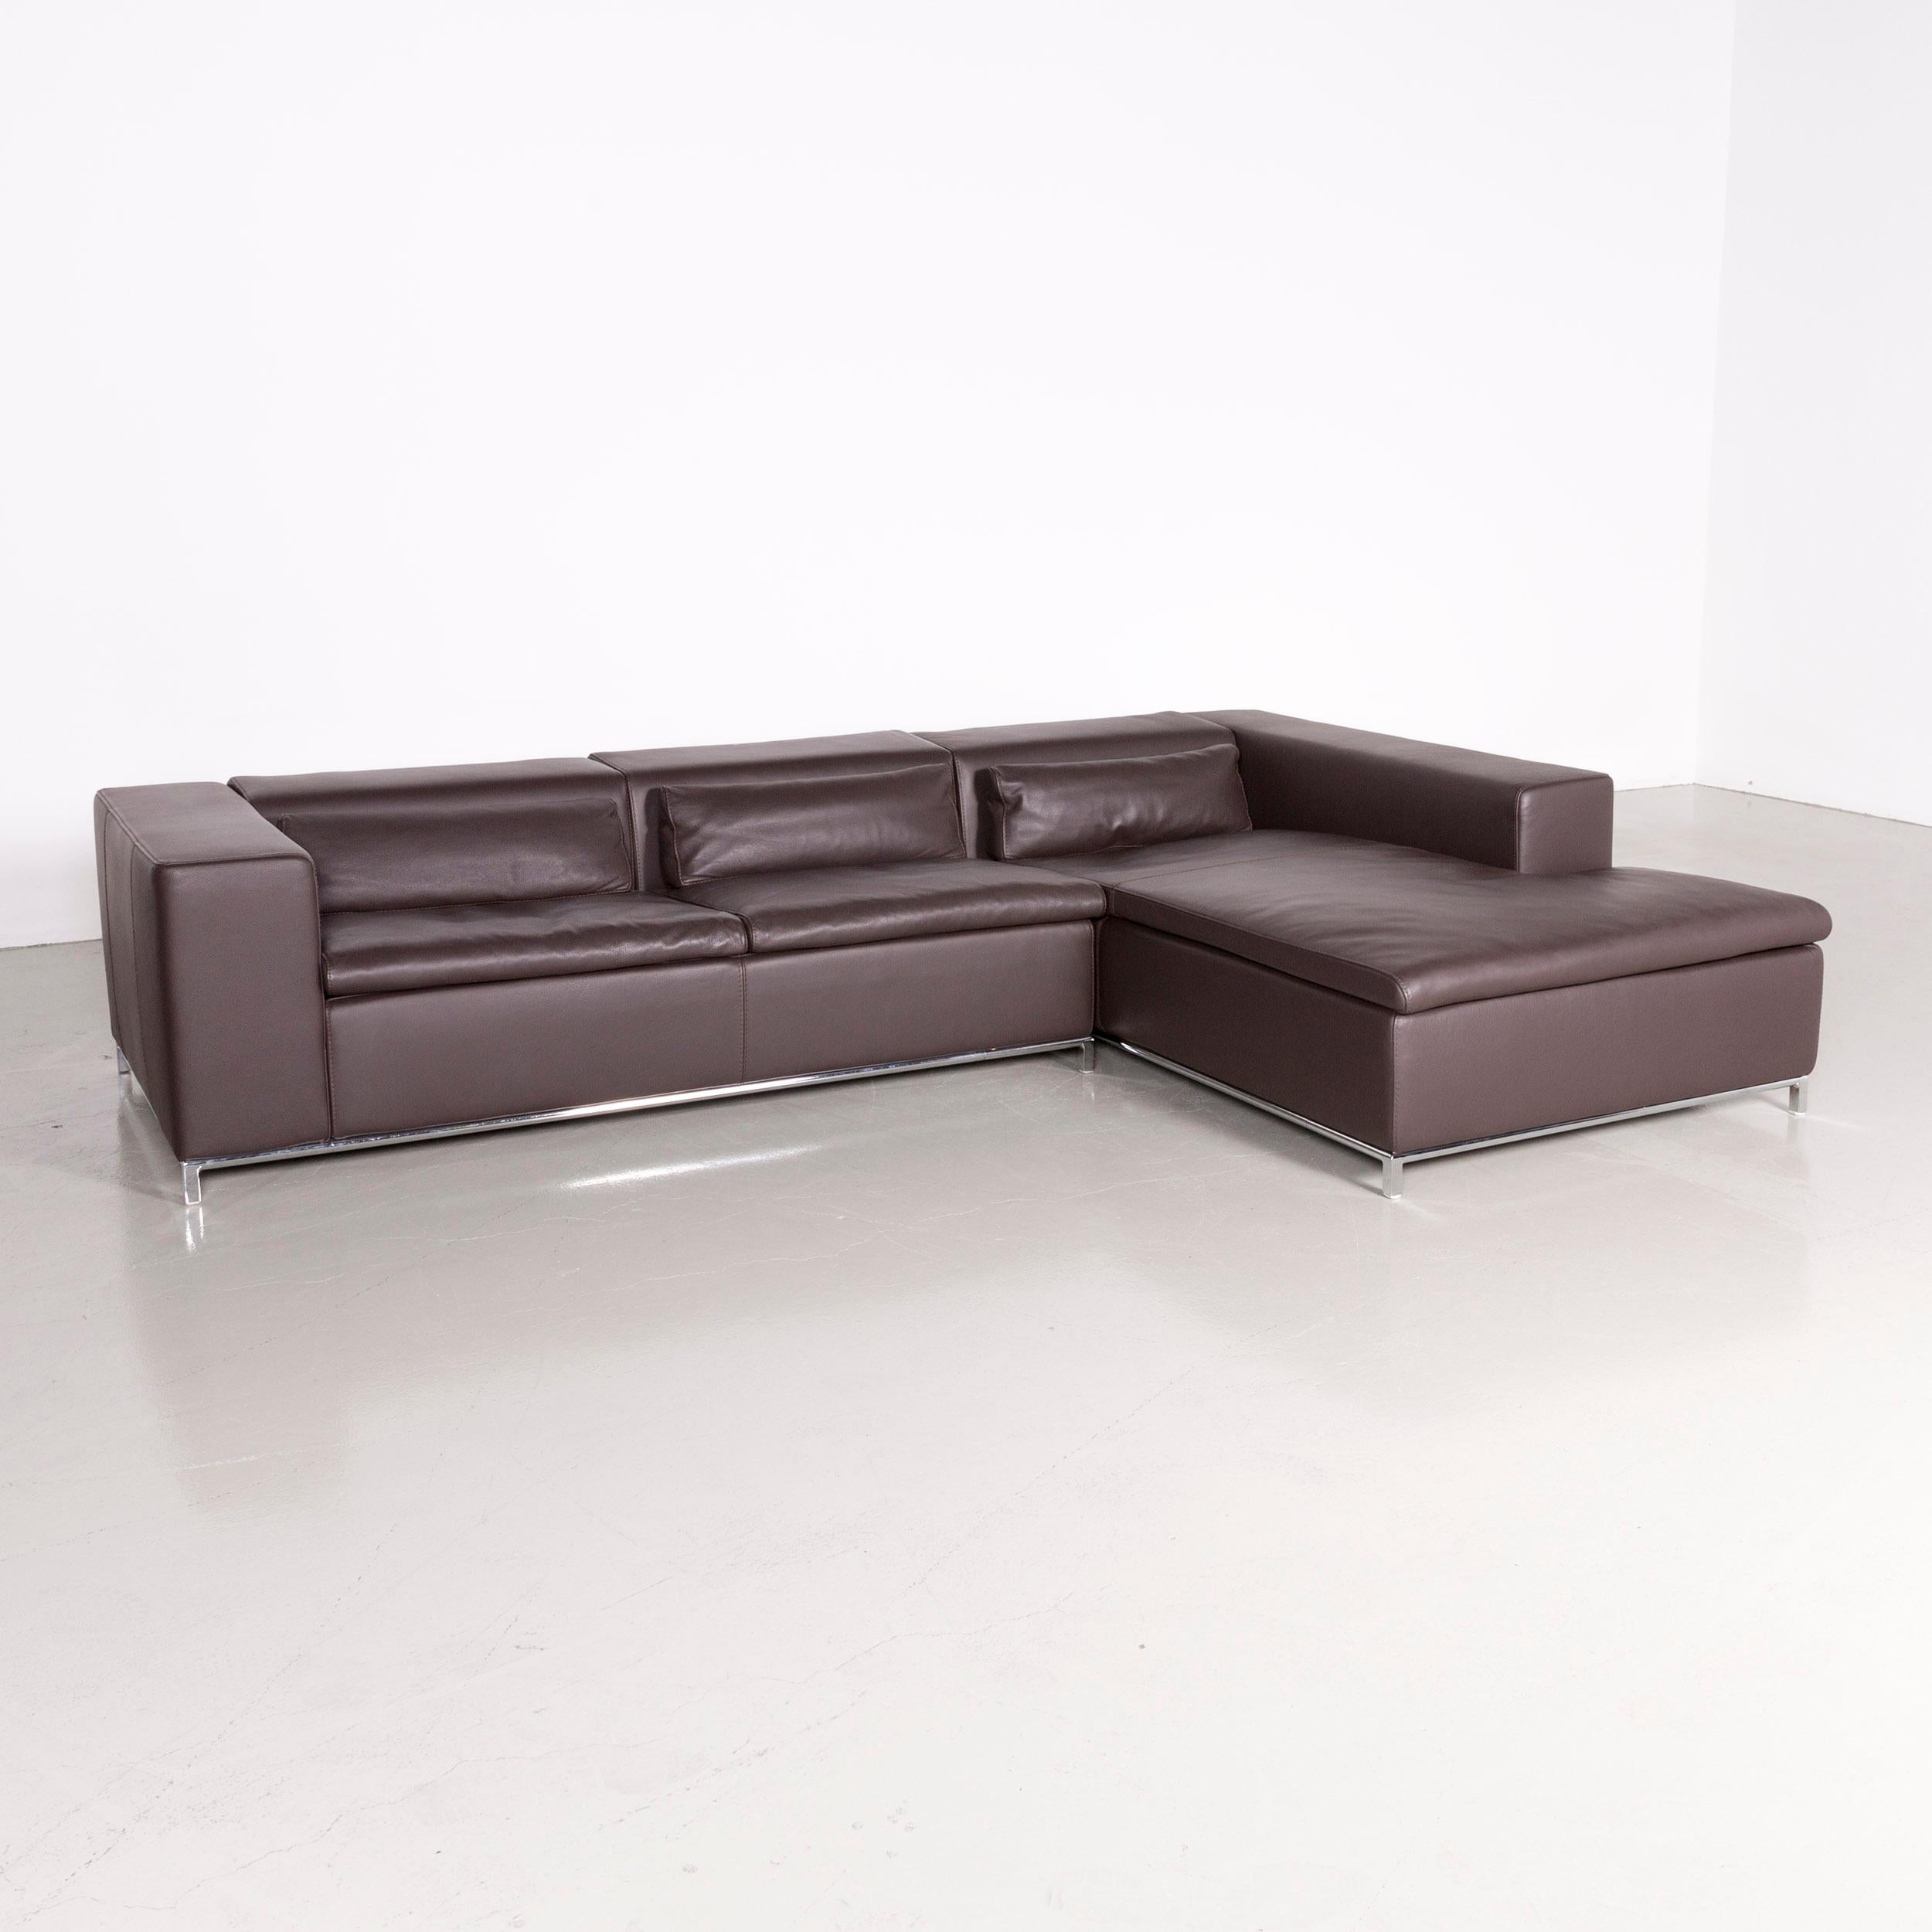 Who's perfect designer leather corner-sofa brown couch.